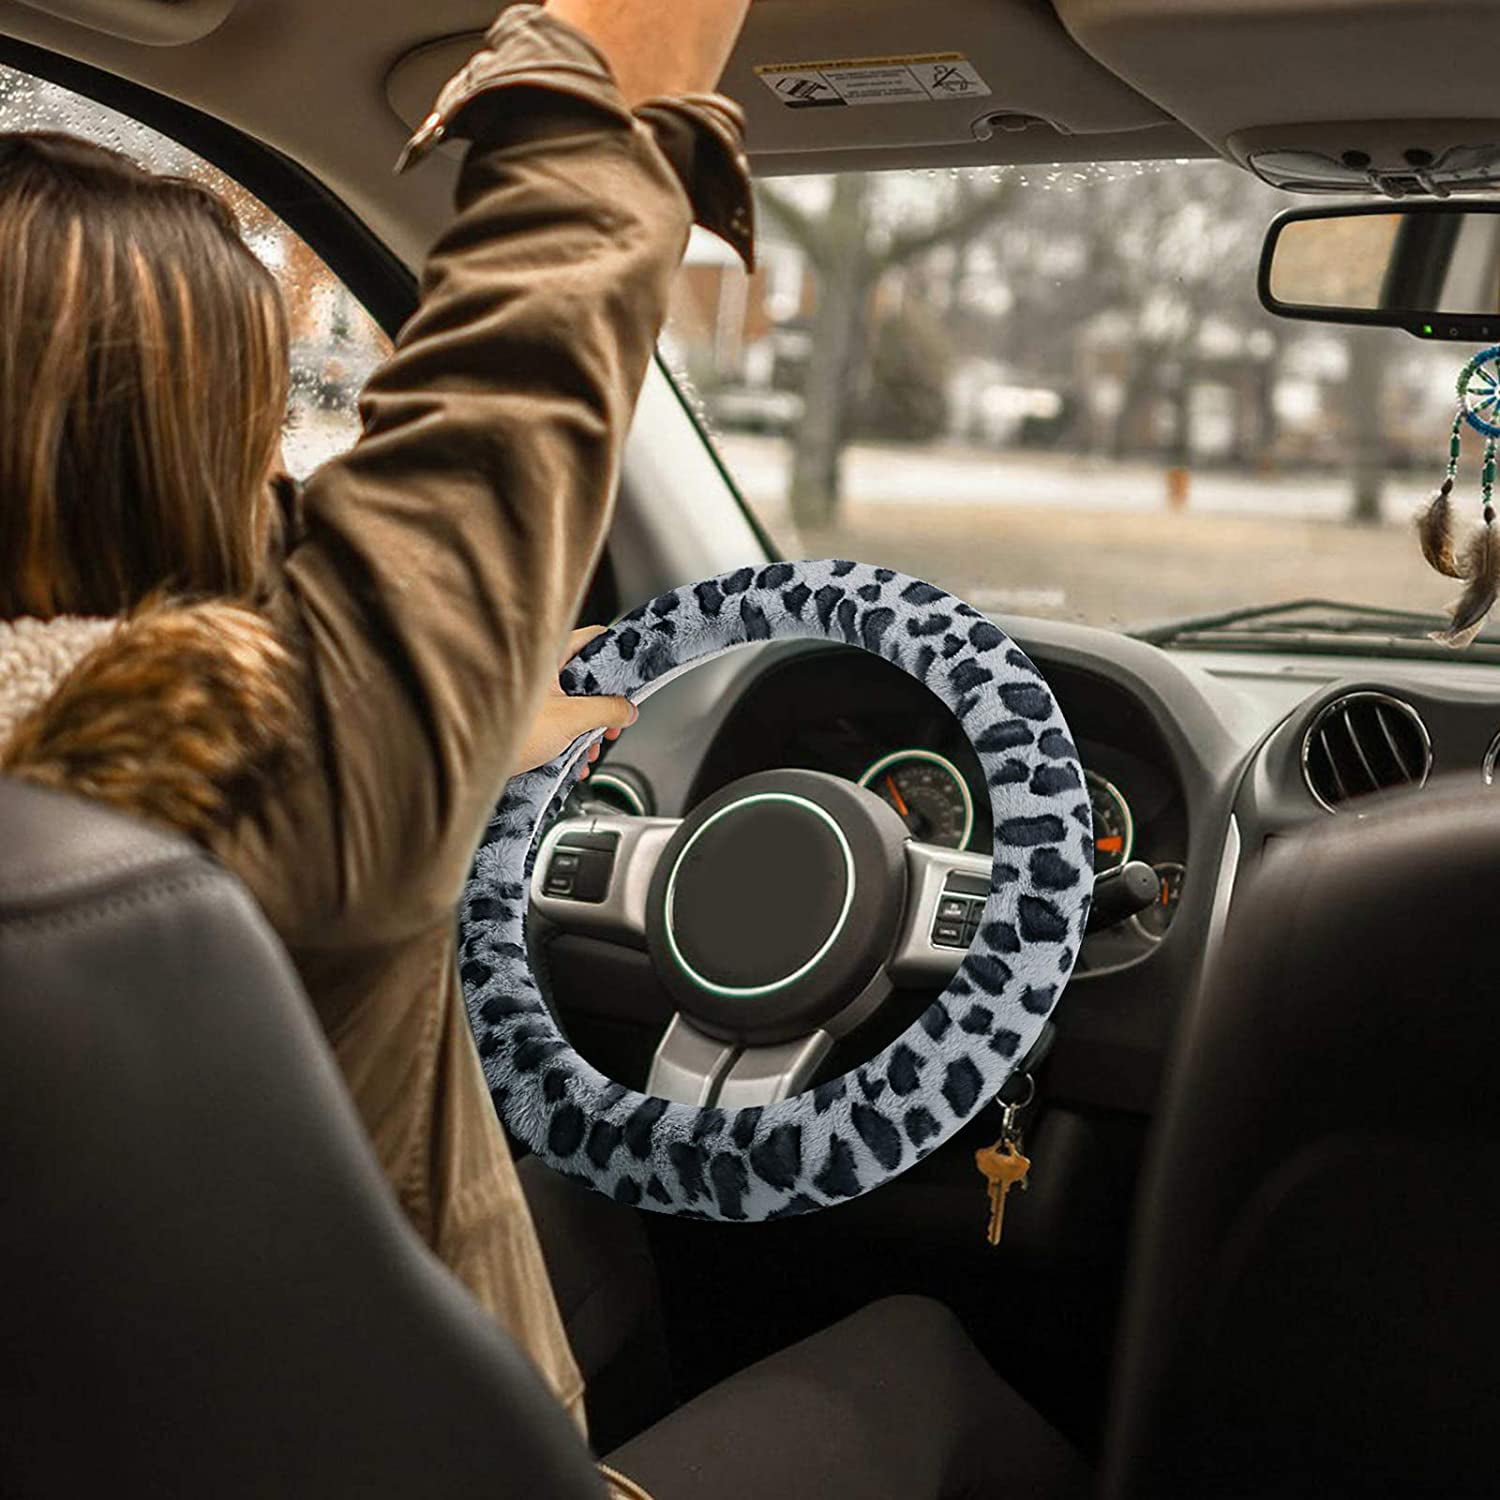 Accmor Fluffy Steering Wheel Cover for Women Girls Ladies 1 Set 3 Pcs Fur Car Wheel Cover & Handbrake Cover & Gear Shift Cover Universal Fit 15 inch Winter Warm Fuzzy Vehicle Wheel Protector 